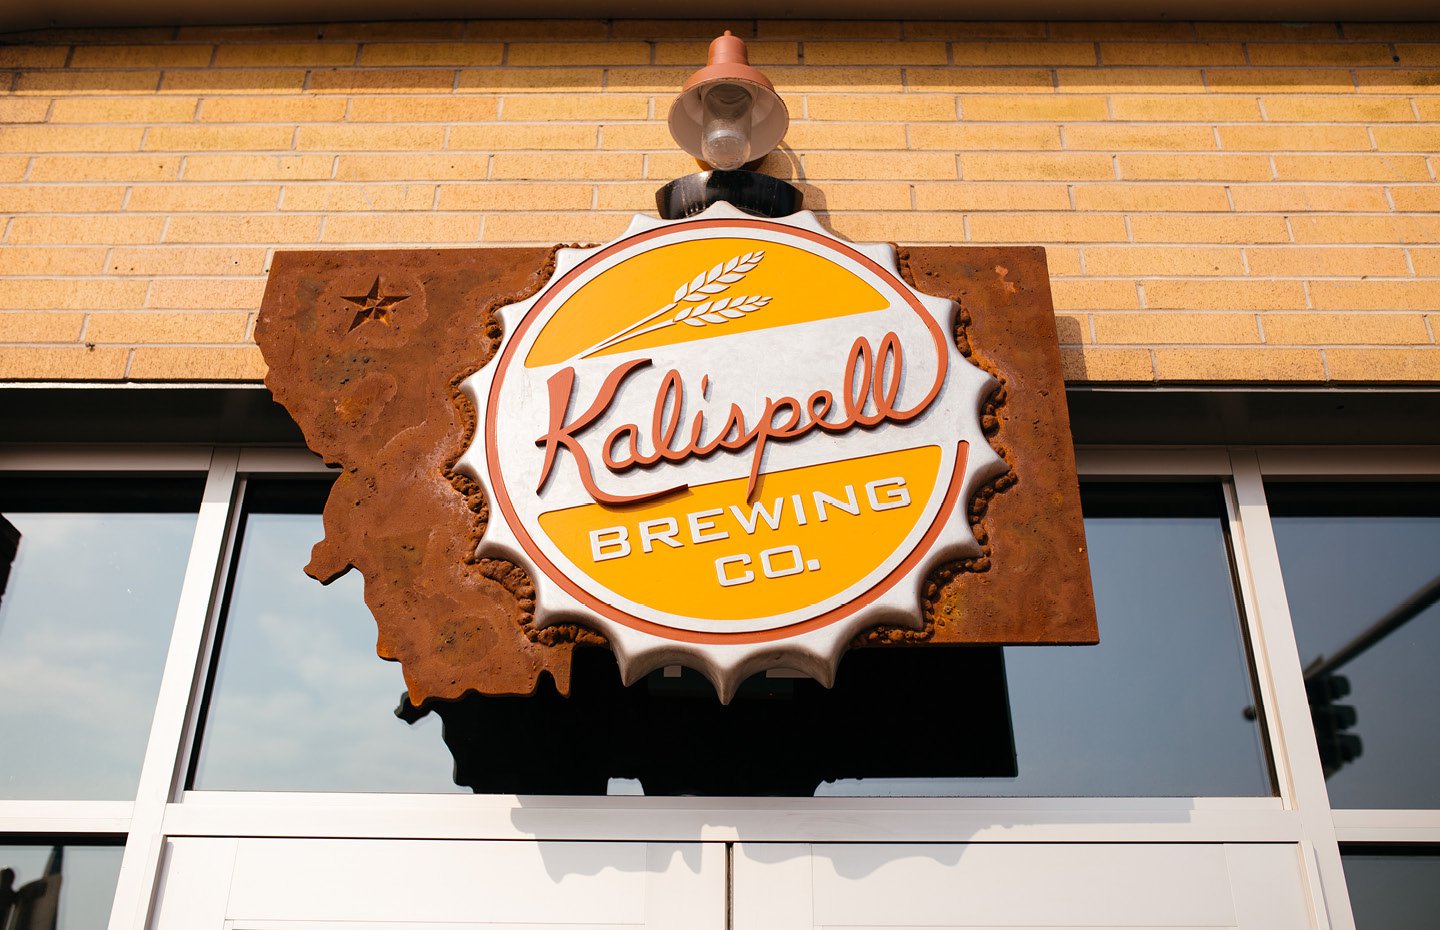 Outside image of Kalispell Brewing Co.